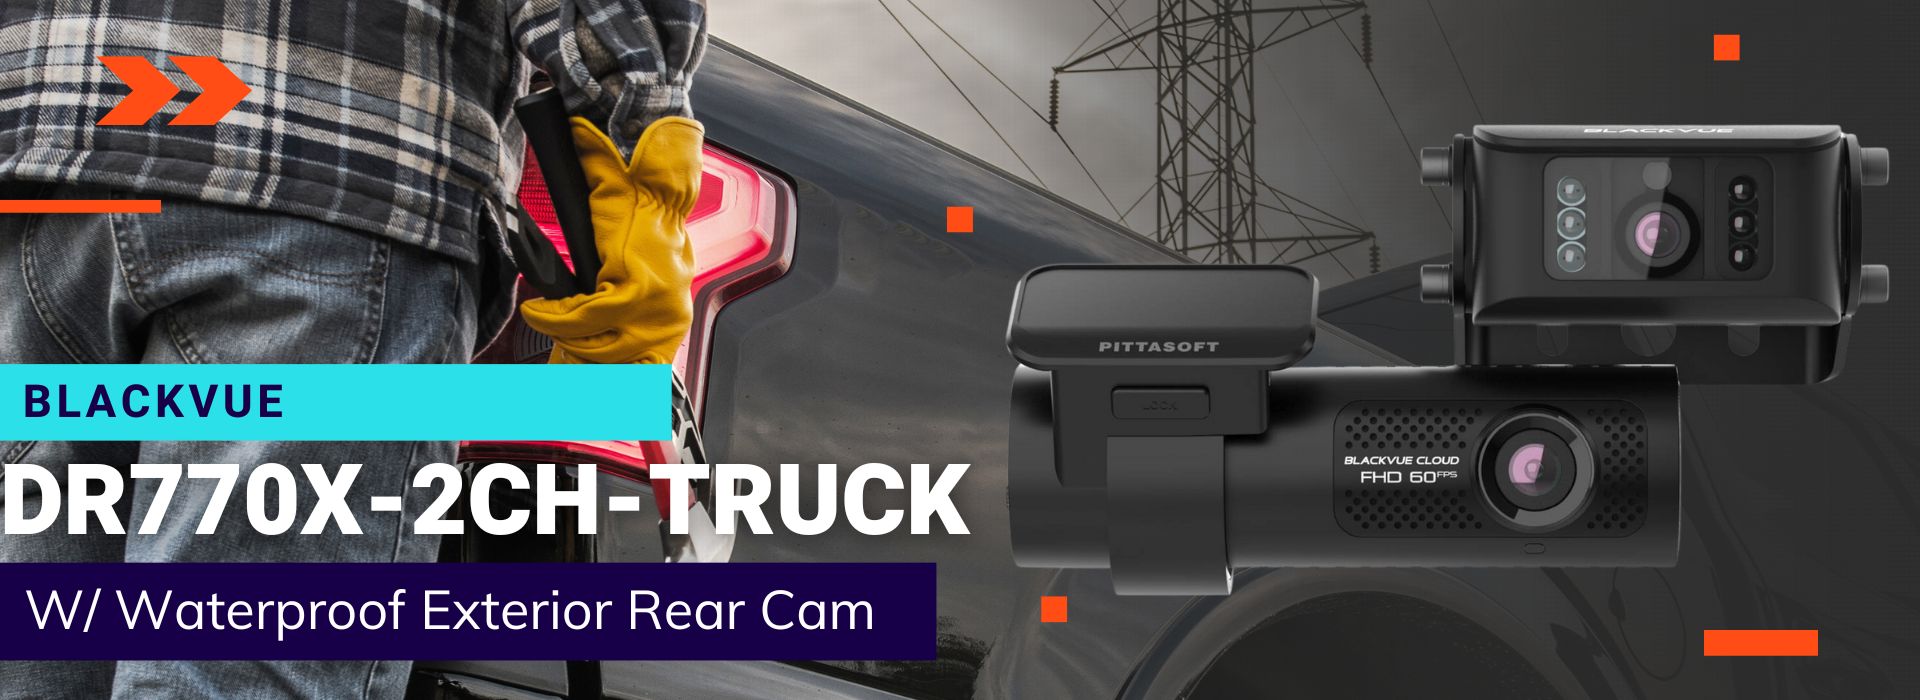 https://www.thedashcamstore.com/content/images/DR770X-2CH-TRUCK-Banner.png